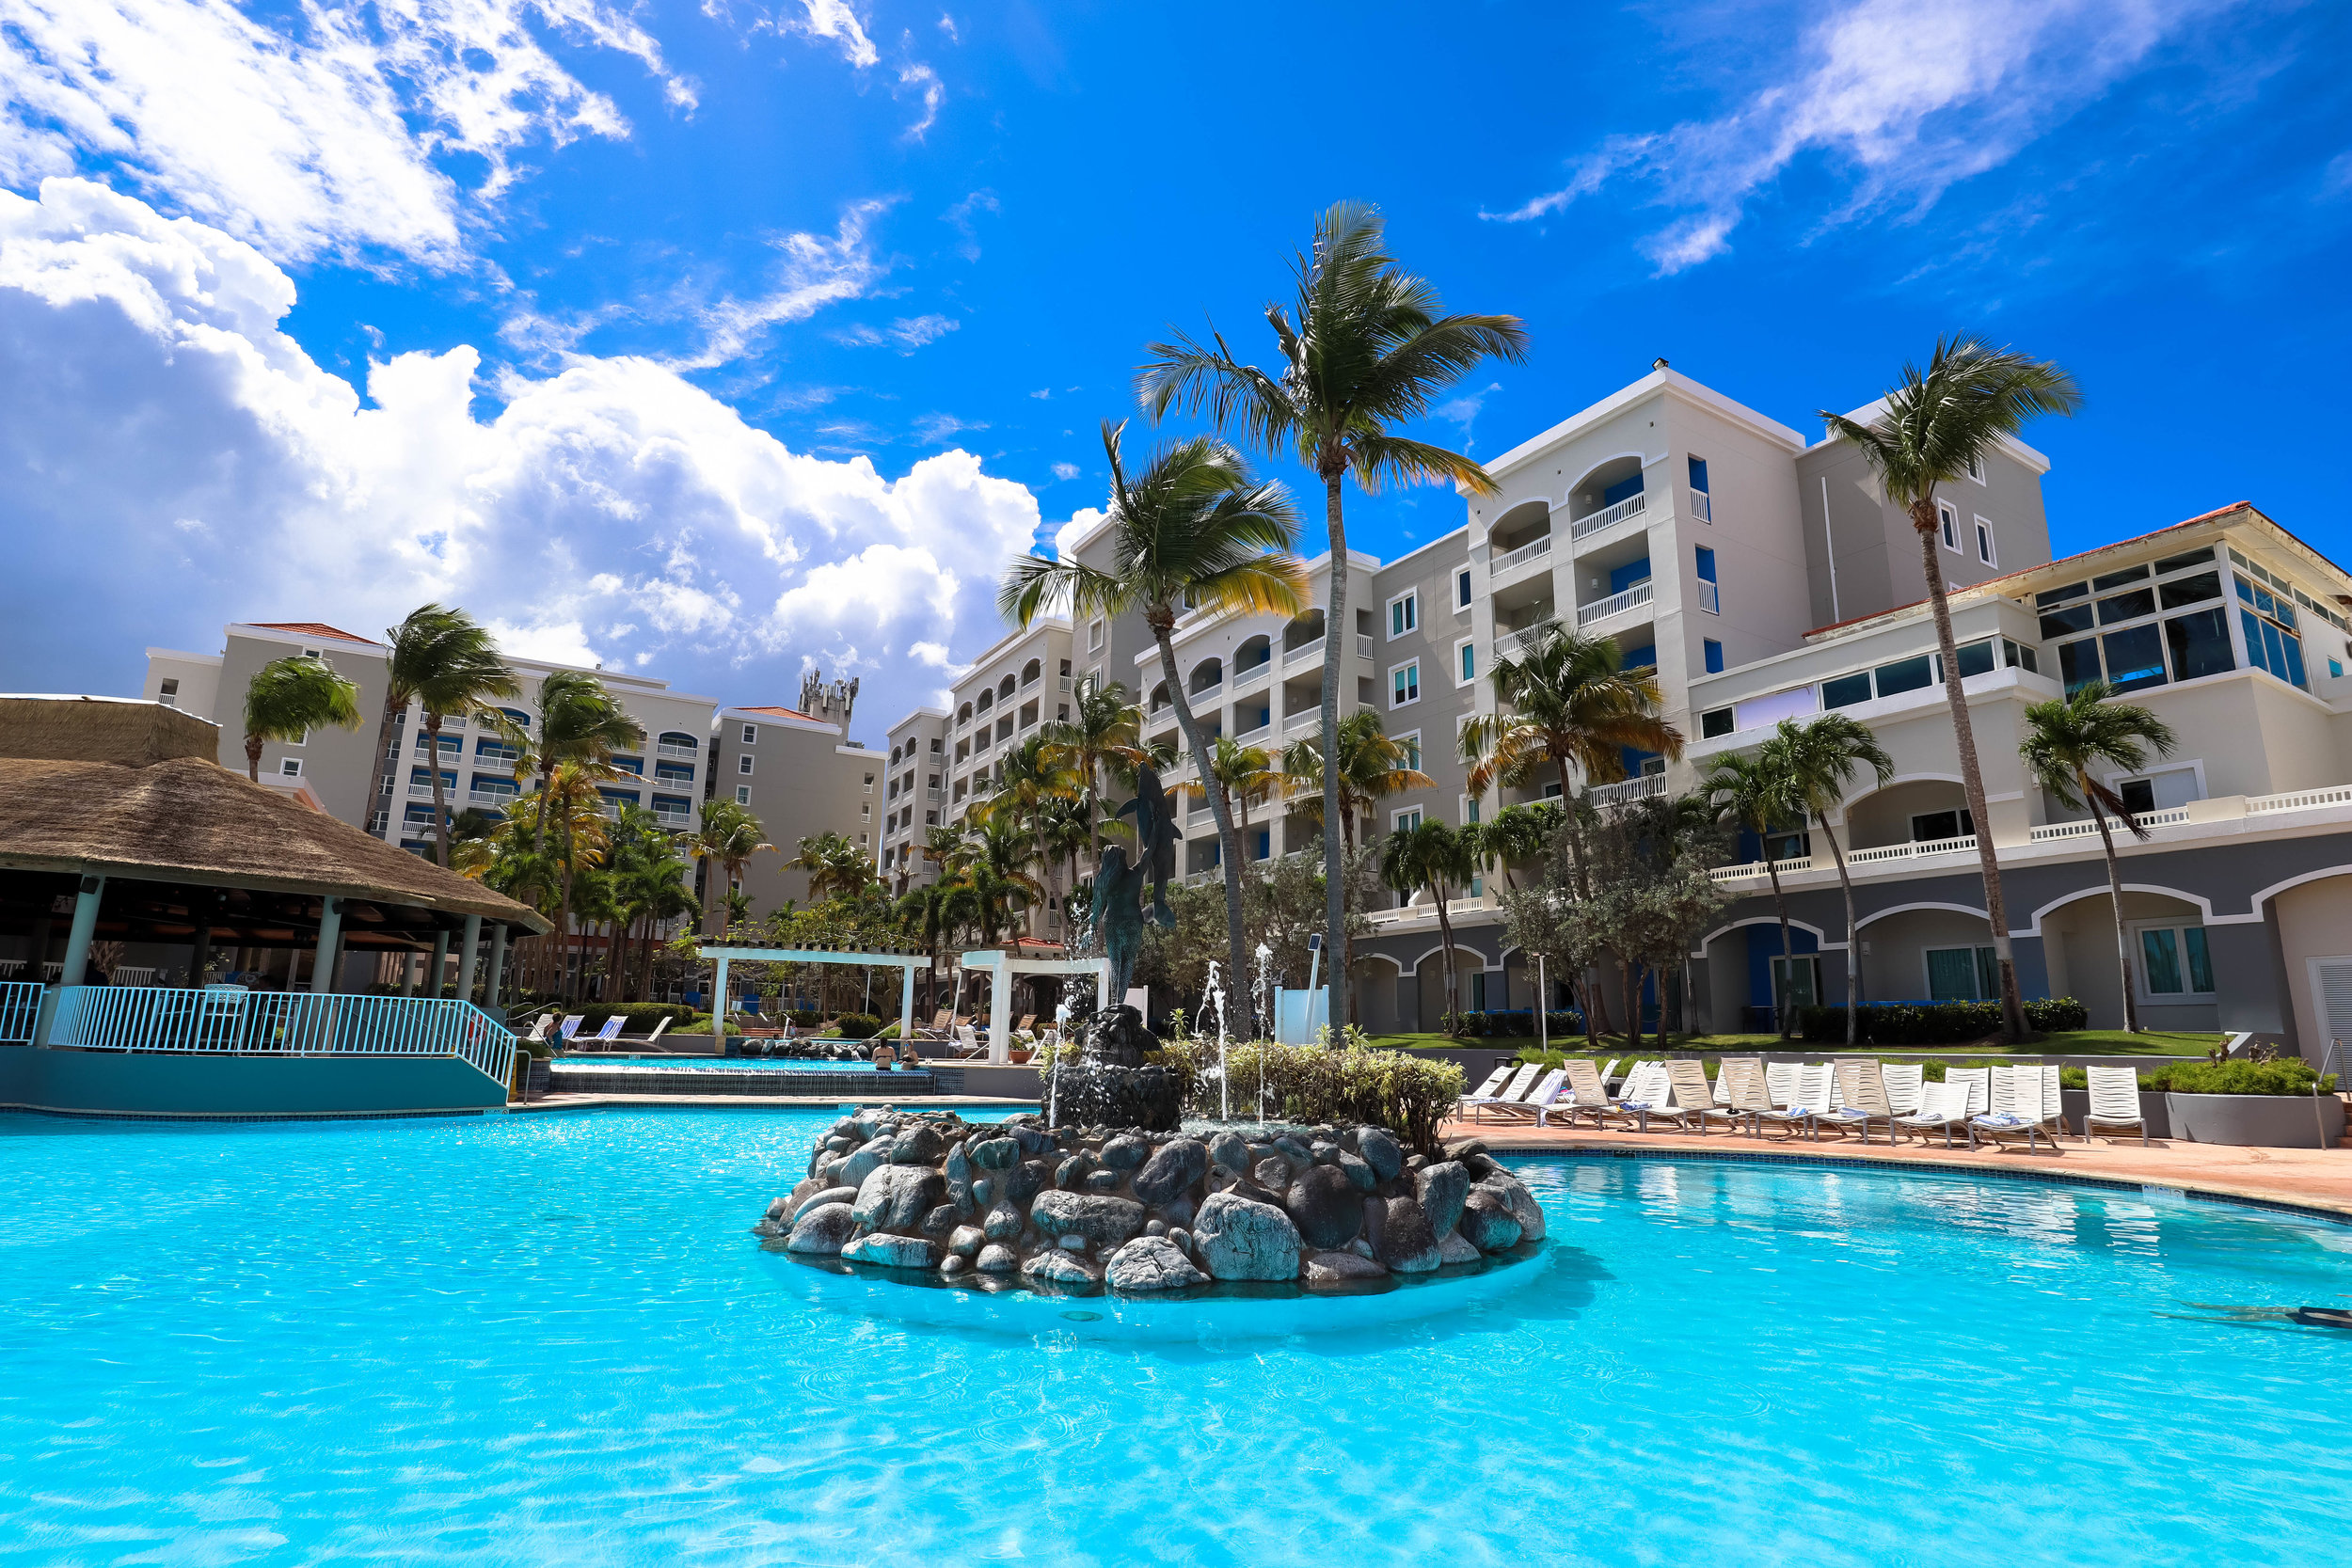 Where To Stay In Dorado Puerto Rico A Review Of Embassy Suites By Hilton Dorado Del Mar Beach Resort Delightful Travellers A Canadian Couple That Loves To Travel